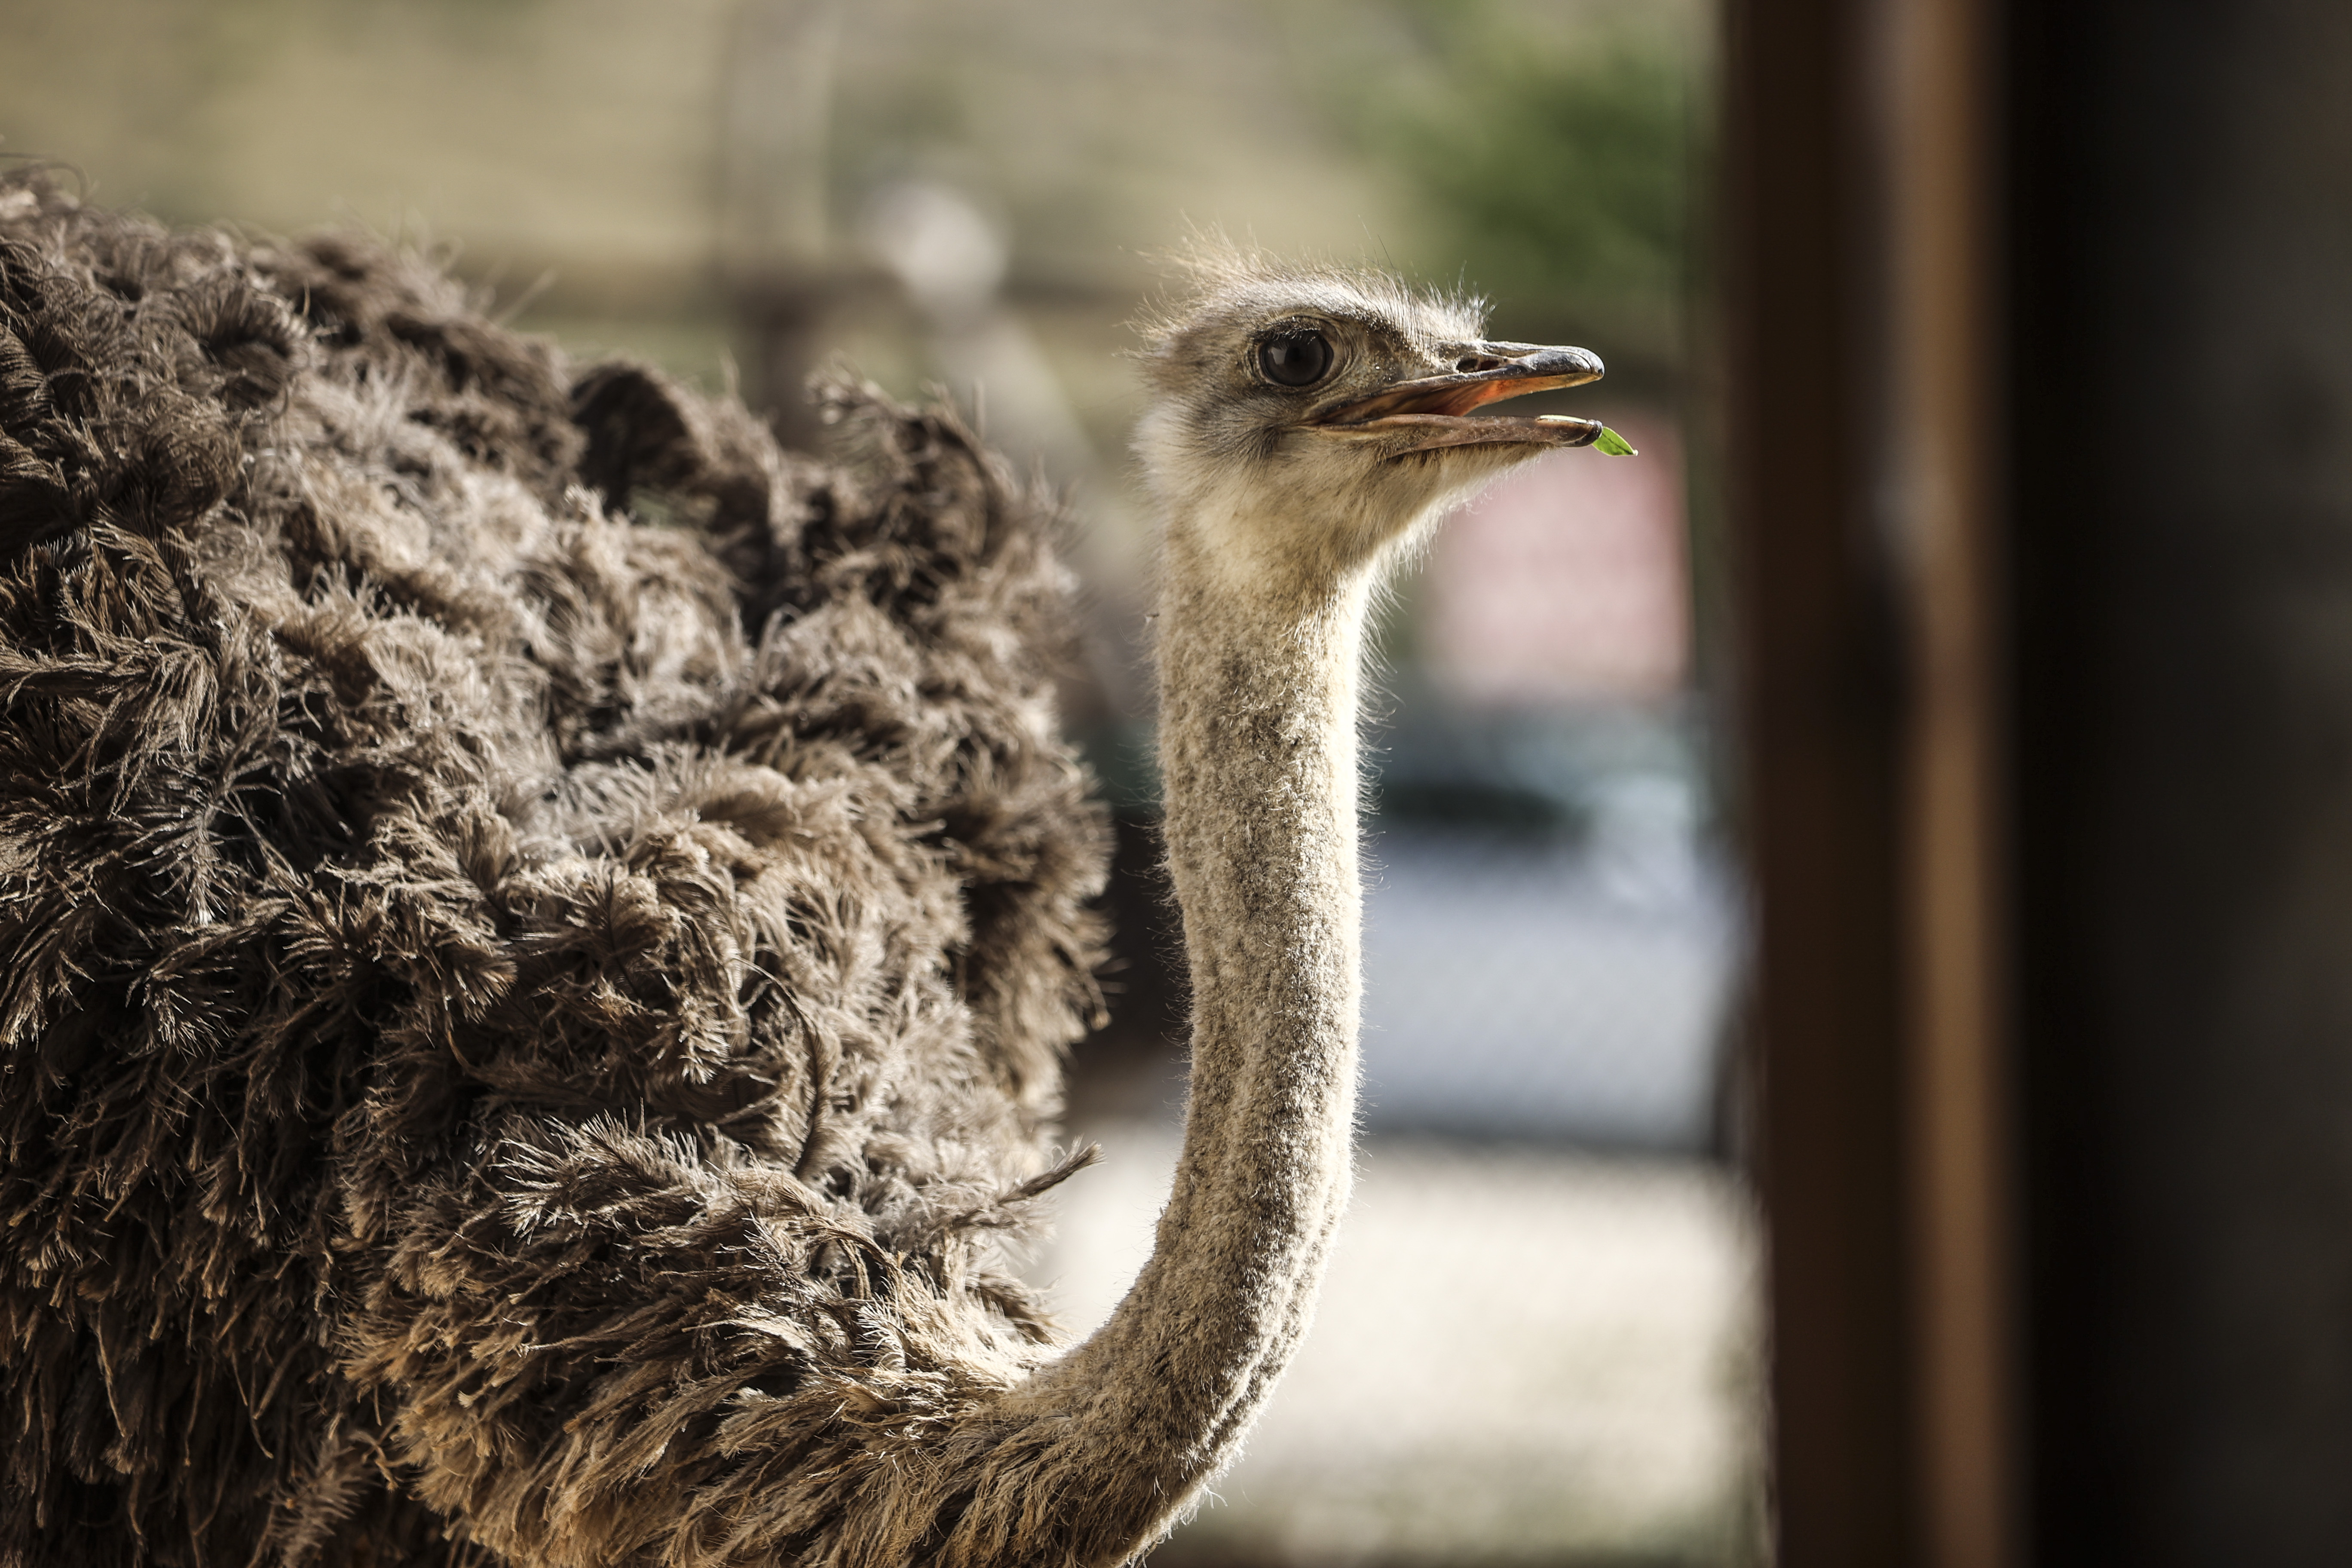 Retired Turk breeds ostriches on his farm in Kirsehir